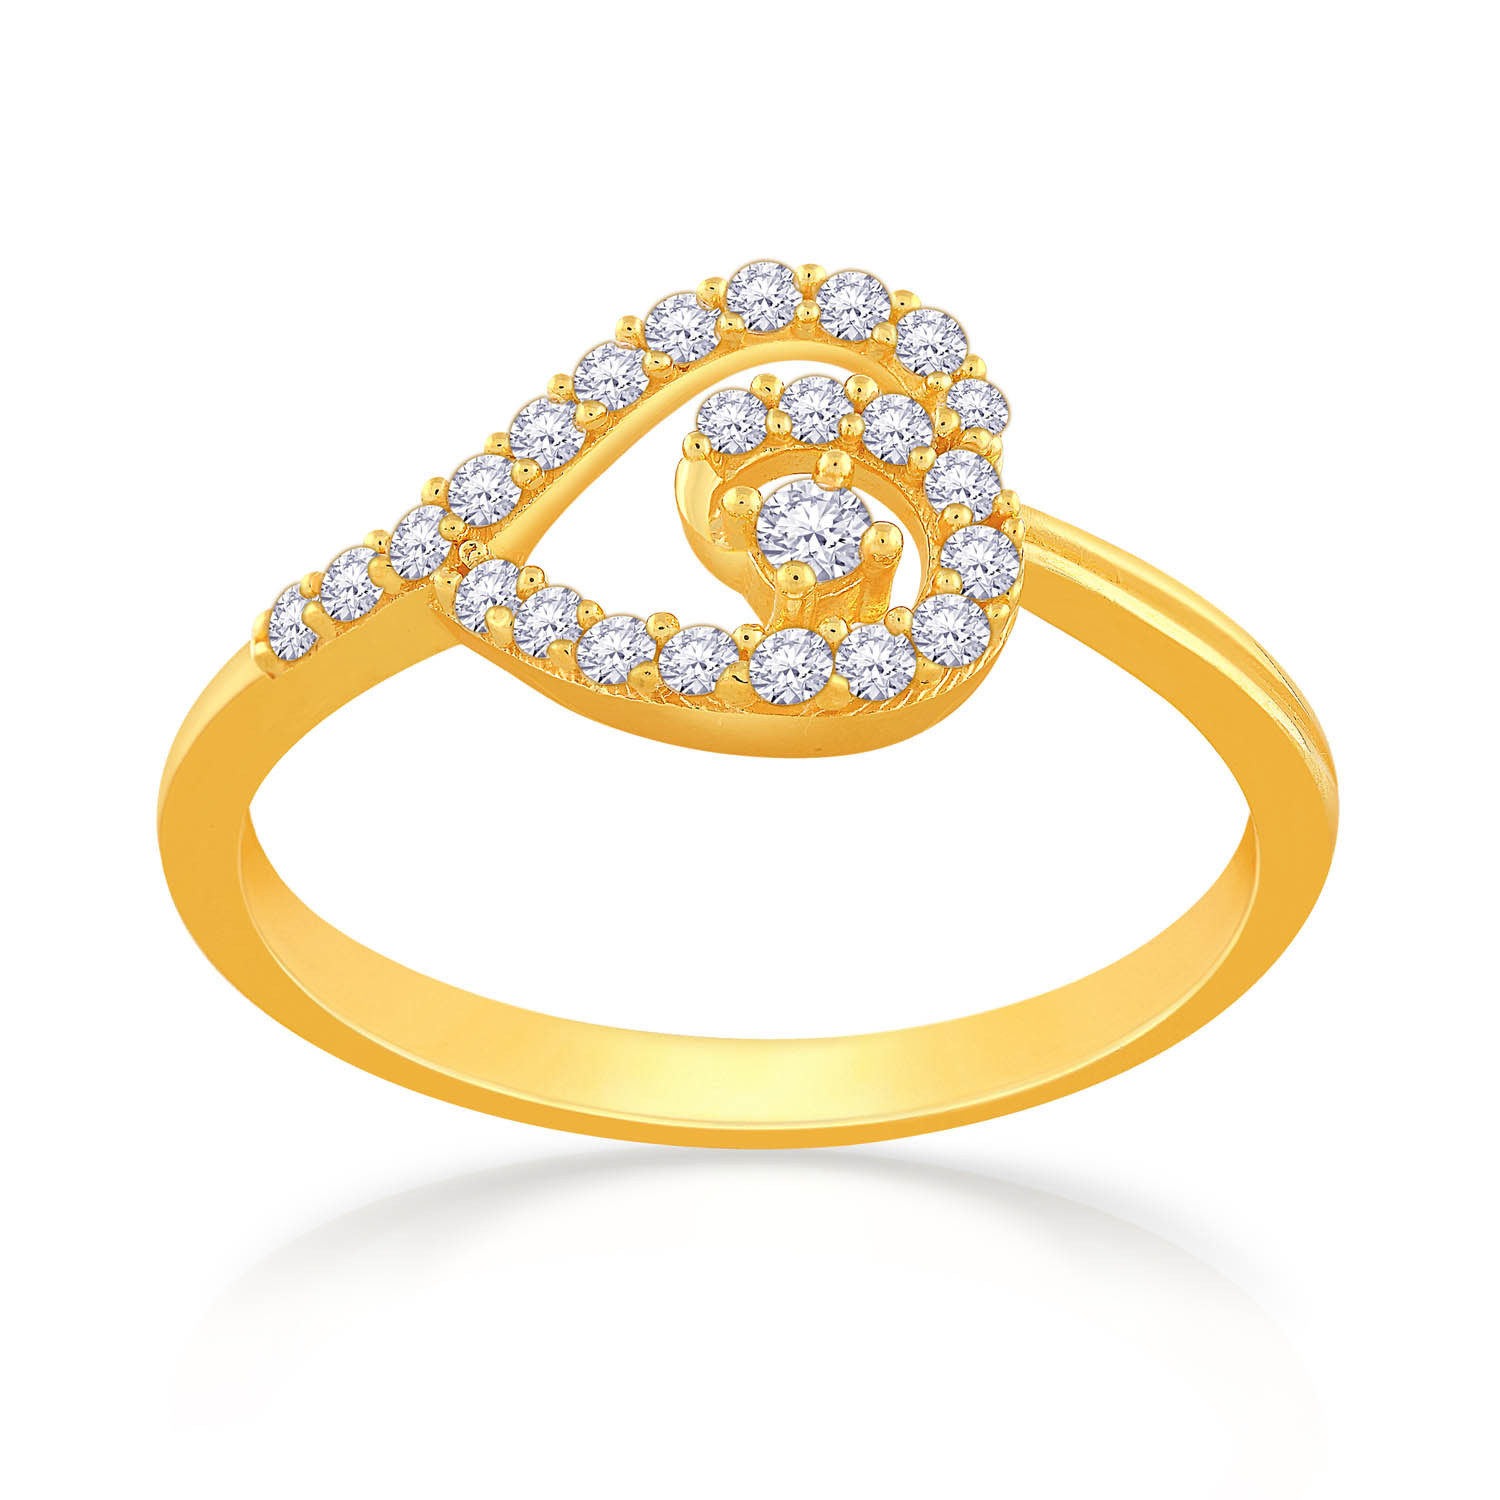 Top Malabar Gold & Diamonds Jewellery Ring Dealers in Bangalore - Best Malabar  Gold & Diamonds Jewellery Ring Dealers - Justdial